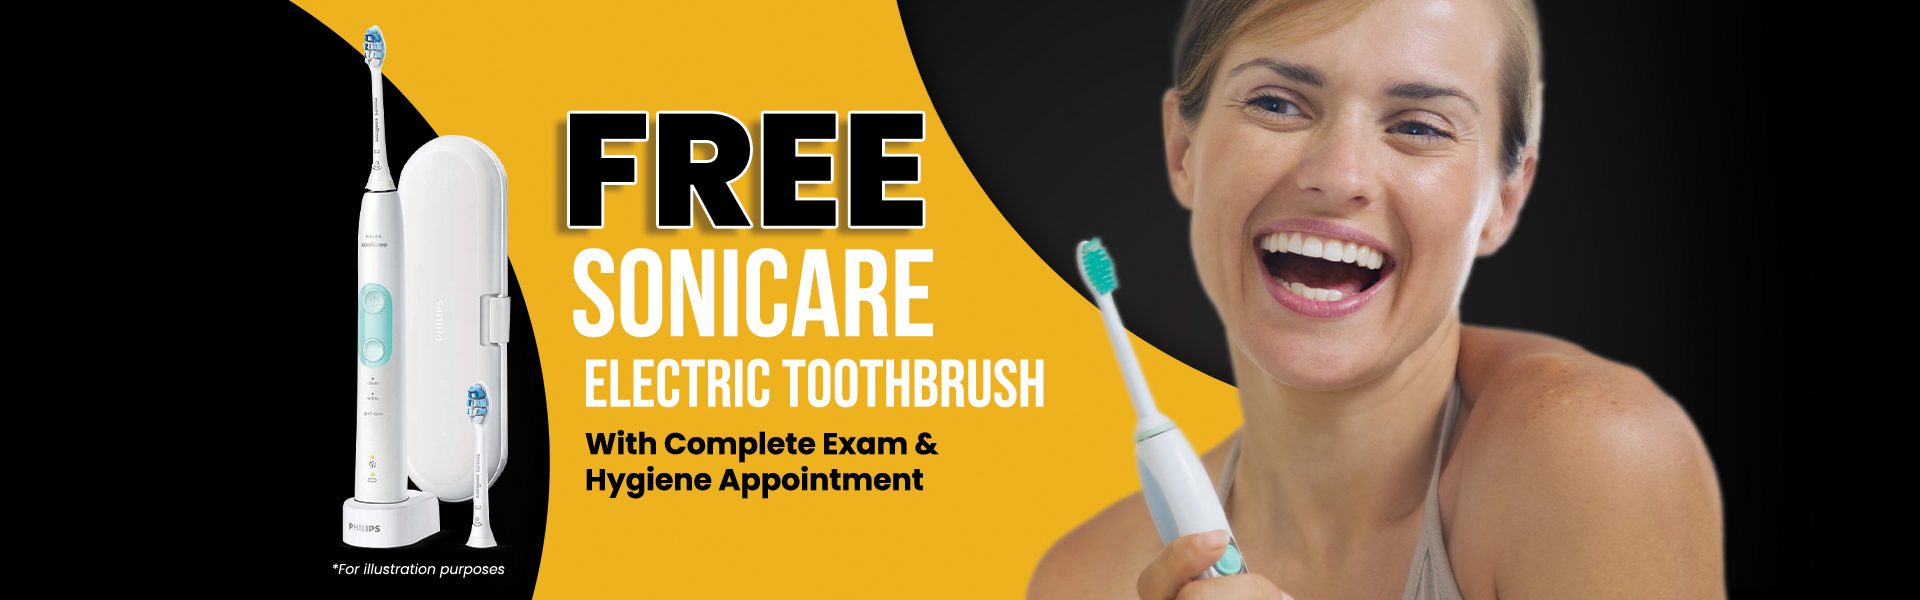 All Smiles Dental Care offering Free Sonicare Electric Toothbrush with complete exam and hygiene appointment